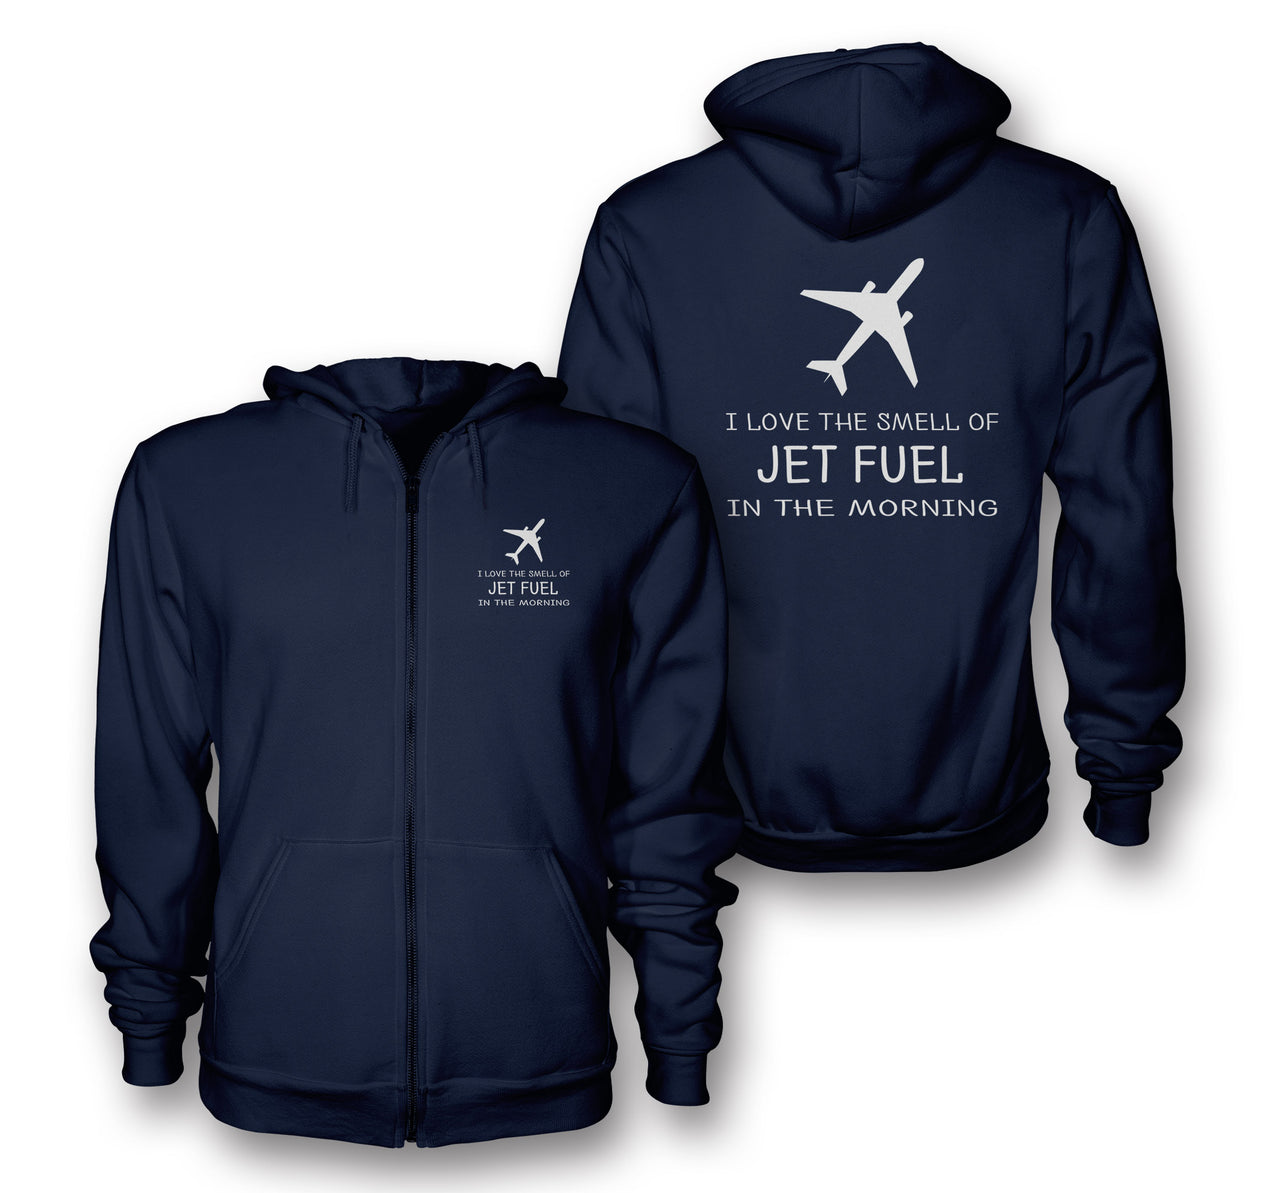 I Love The Smell Of Jet Fuel In The Morning Designed Zipped Hoodies